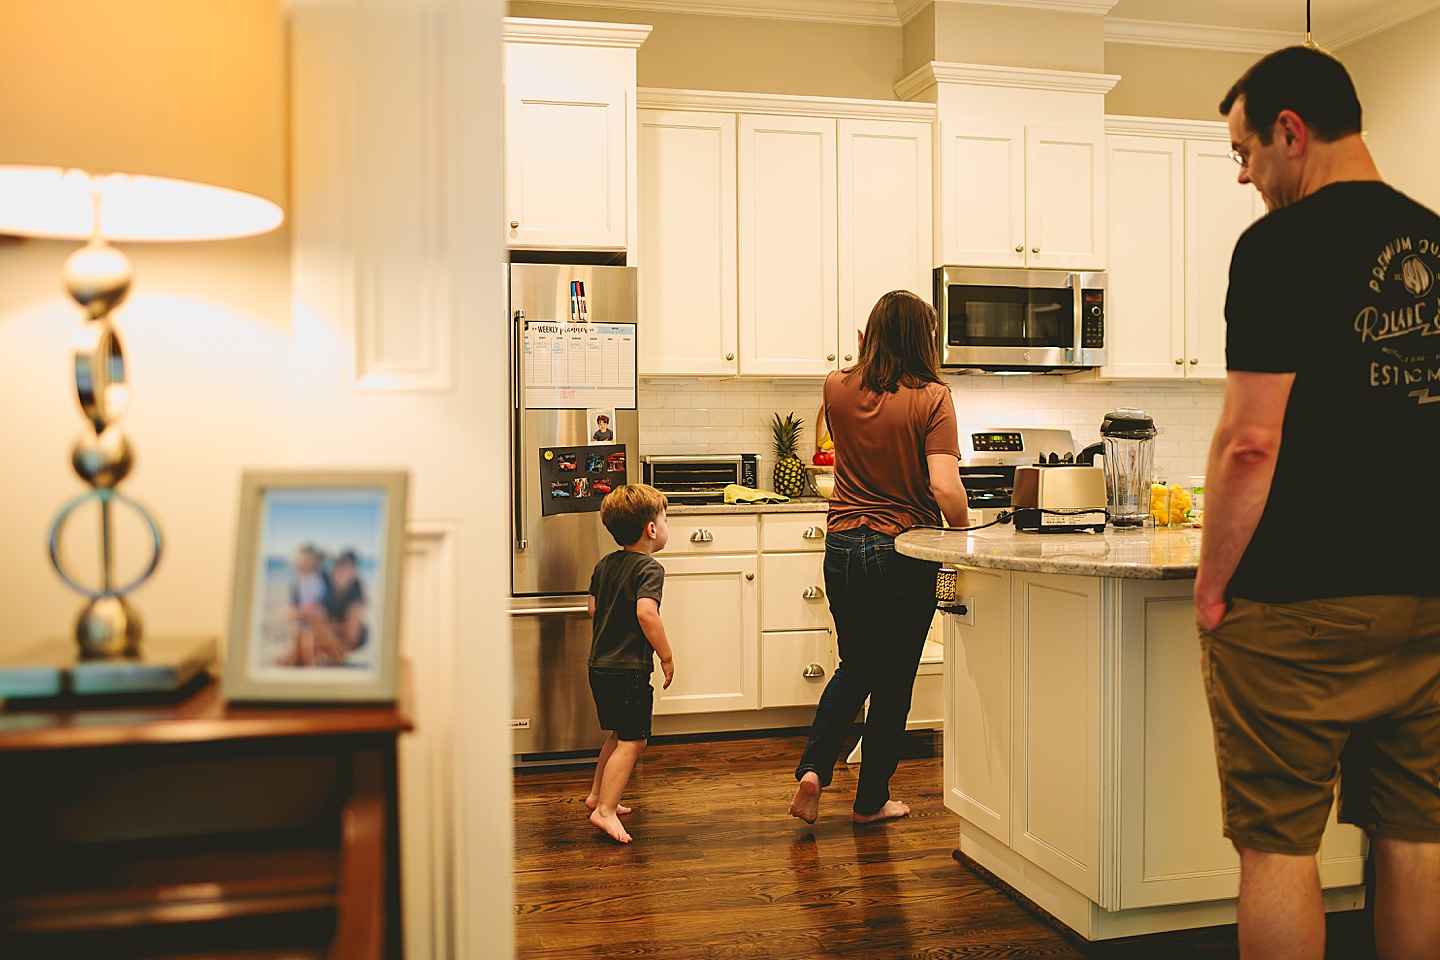 Family making breakfast in kitchen together